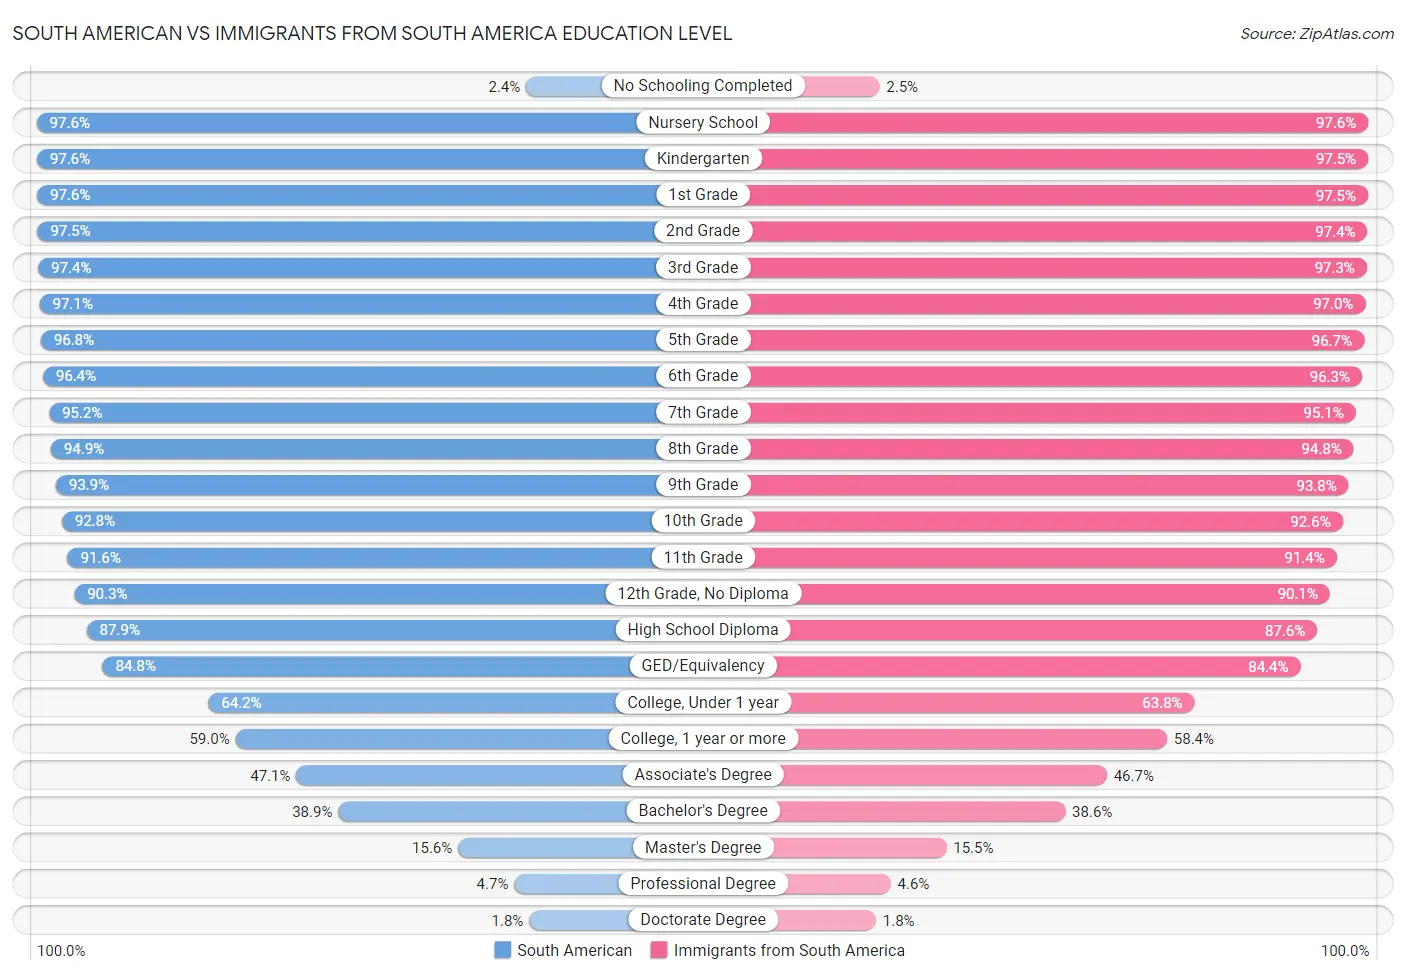 South American vs Immigrants from South America Education Level